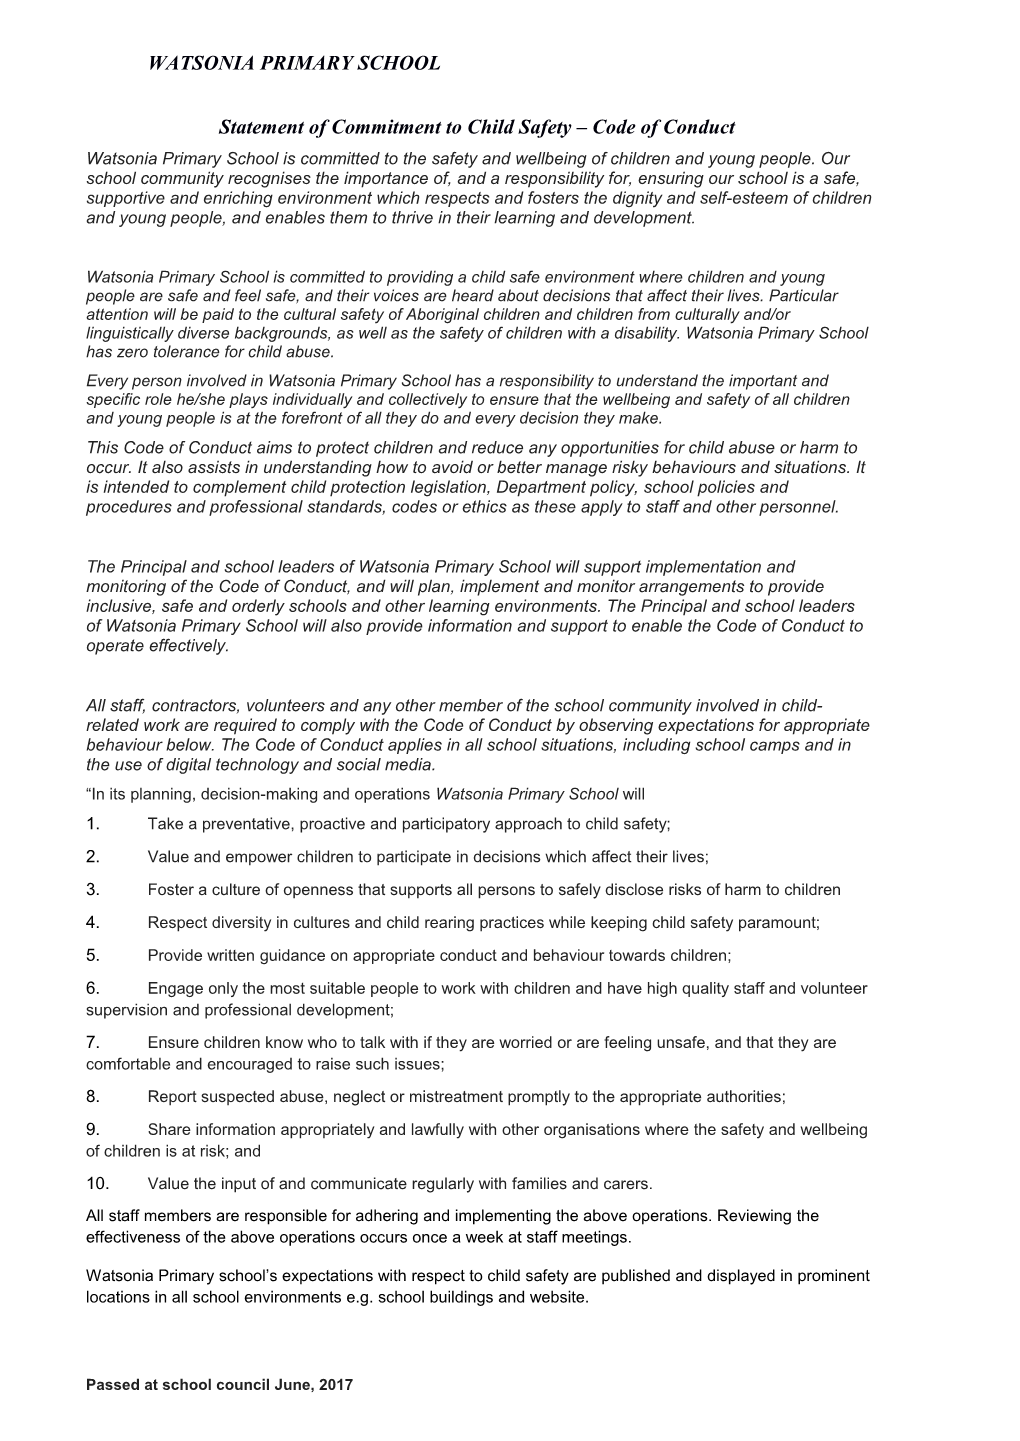 Statement of Commitment to Child Safety Code of Conduct